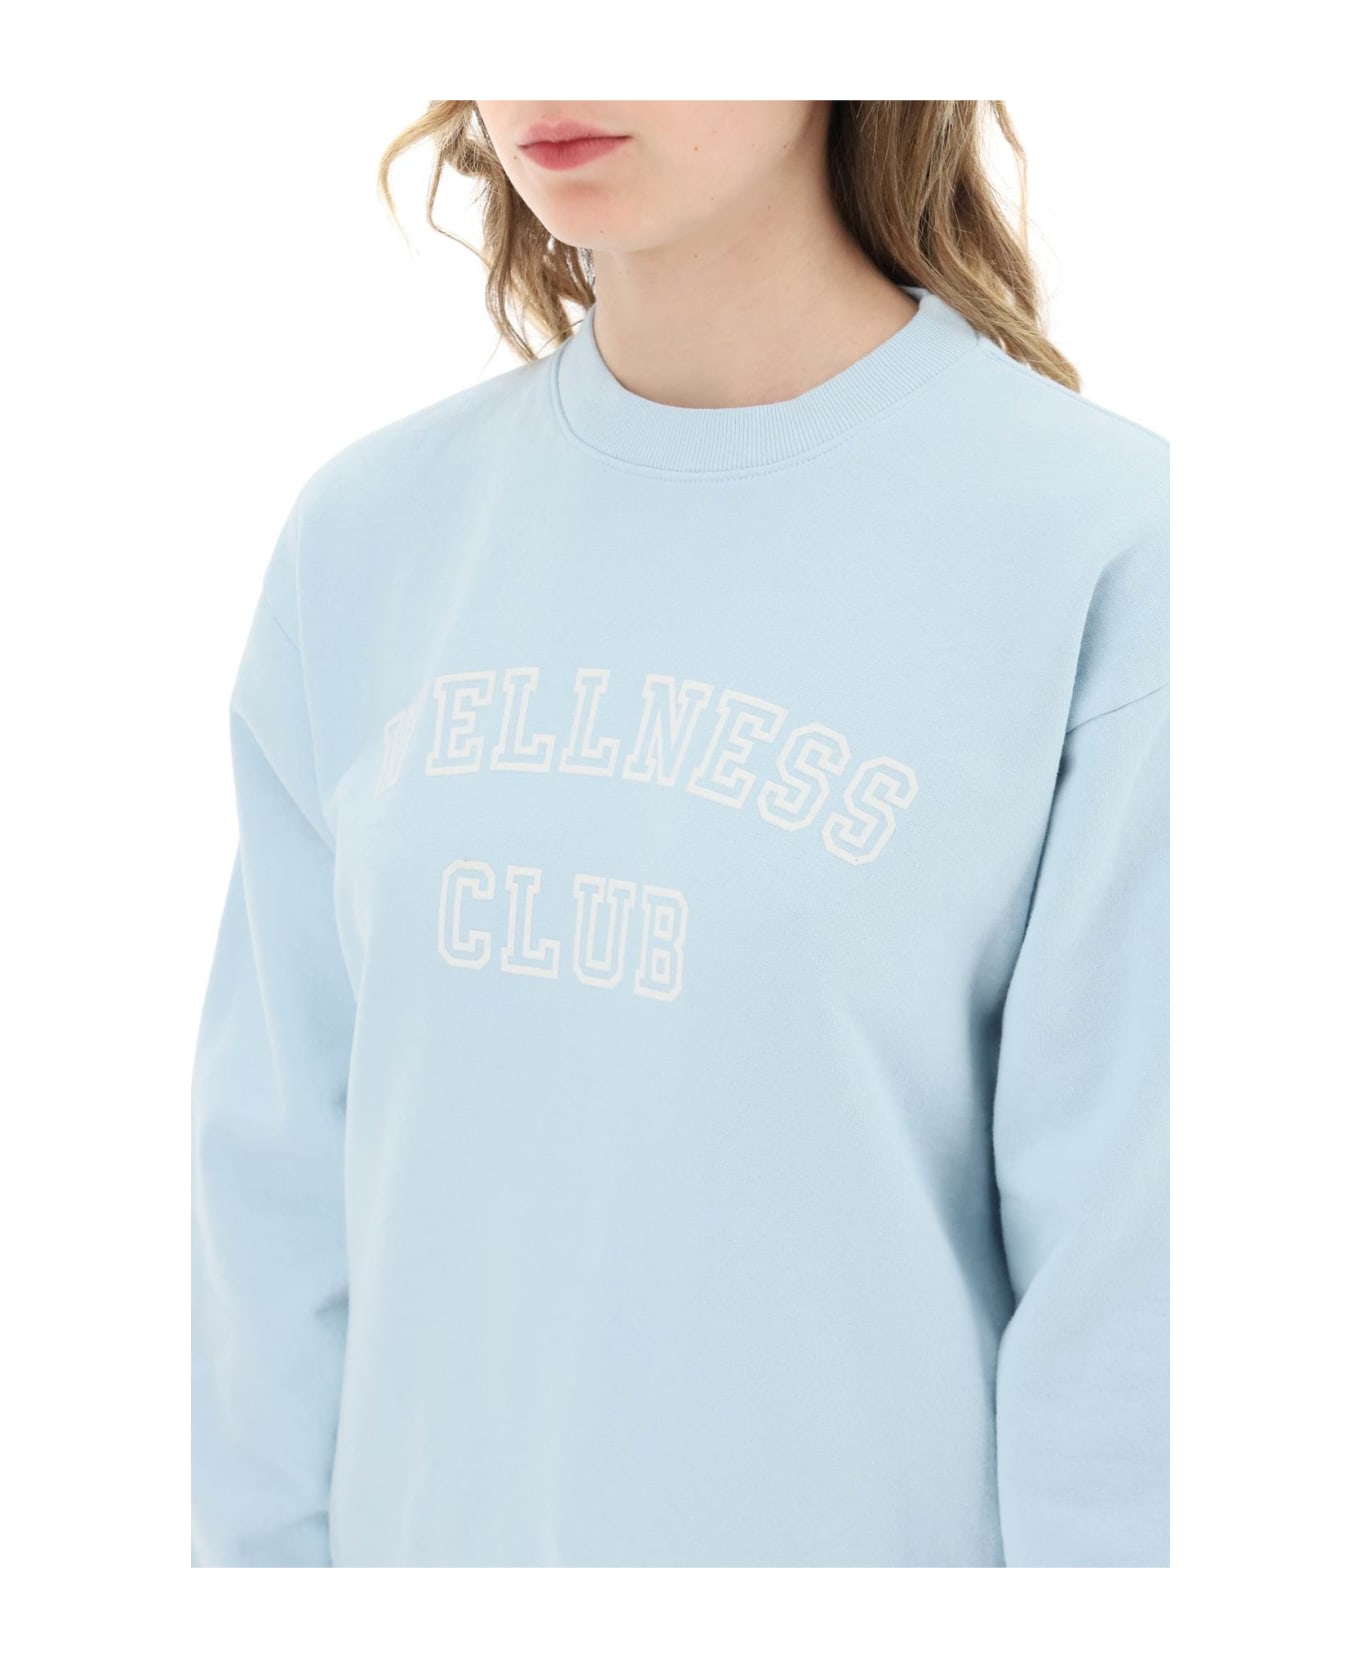 Sporty & Rich Crew-neck Sweatshirt With Lettering Print - BABY BLUE (Light blue)